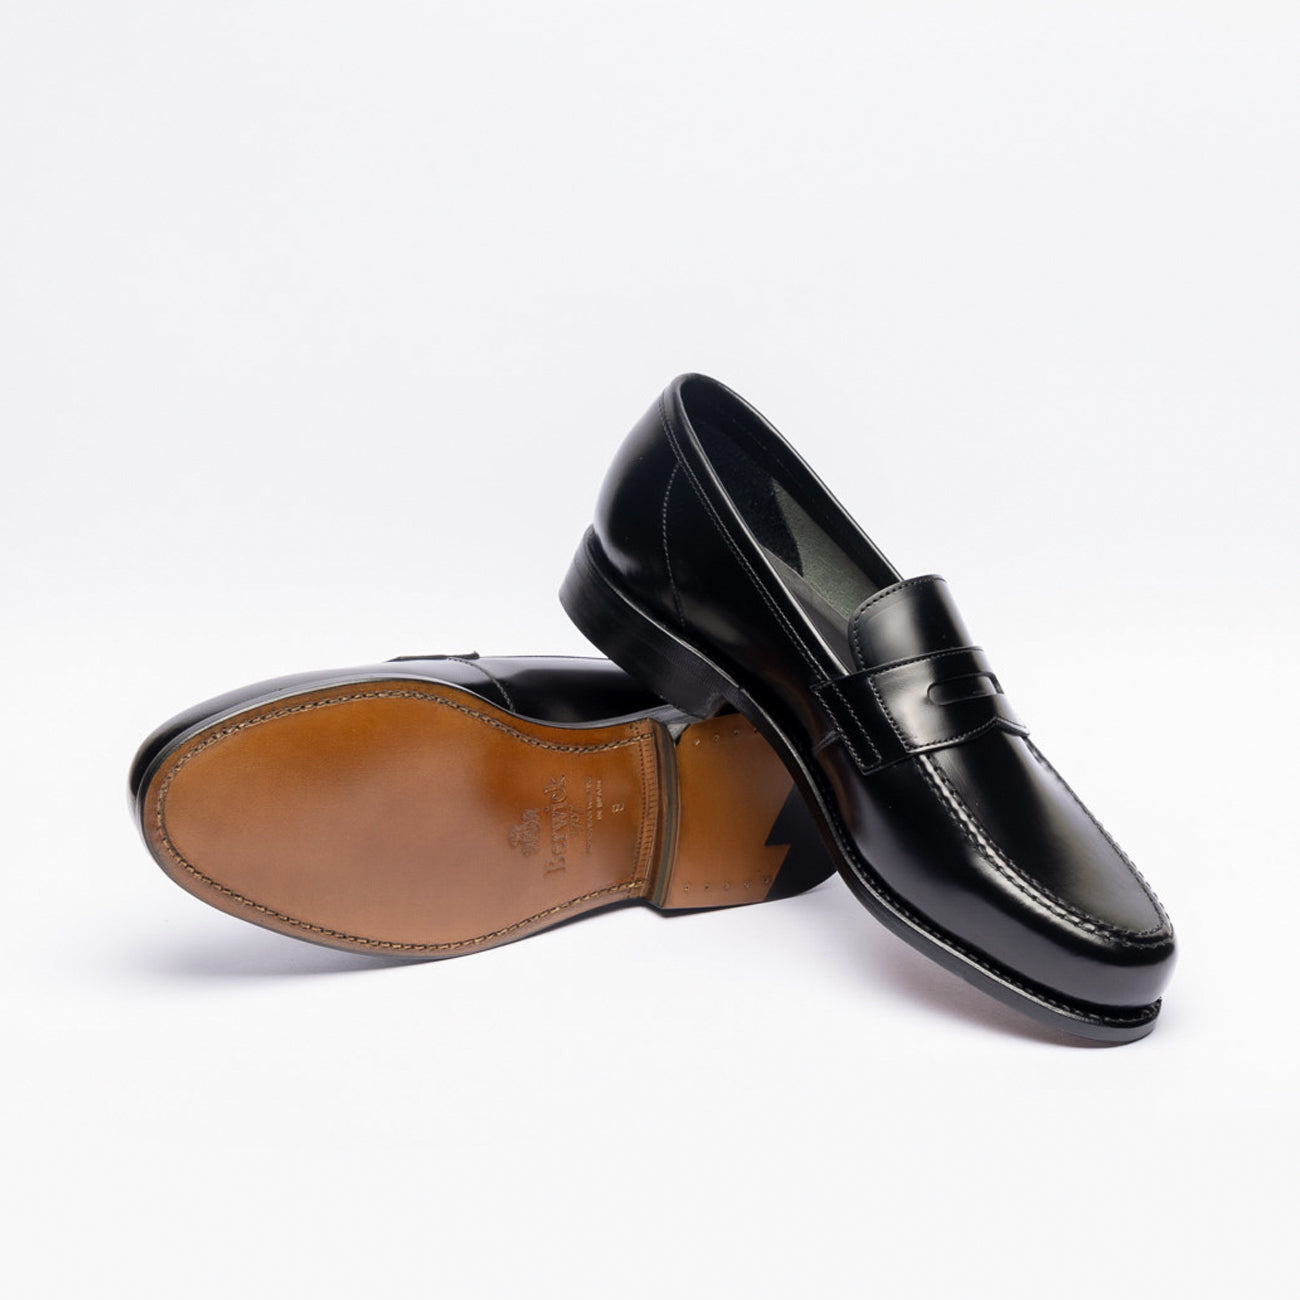 Berwick 5517 penny loafer moccasin in brushed black leather